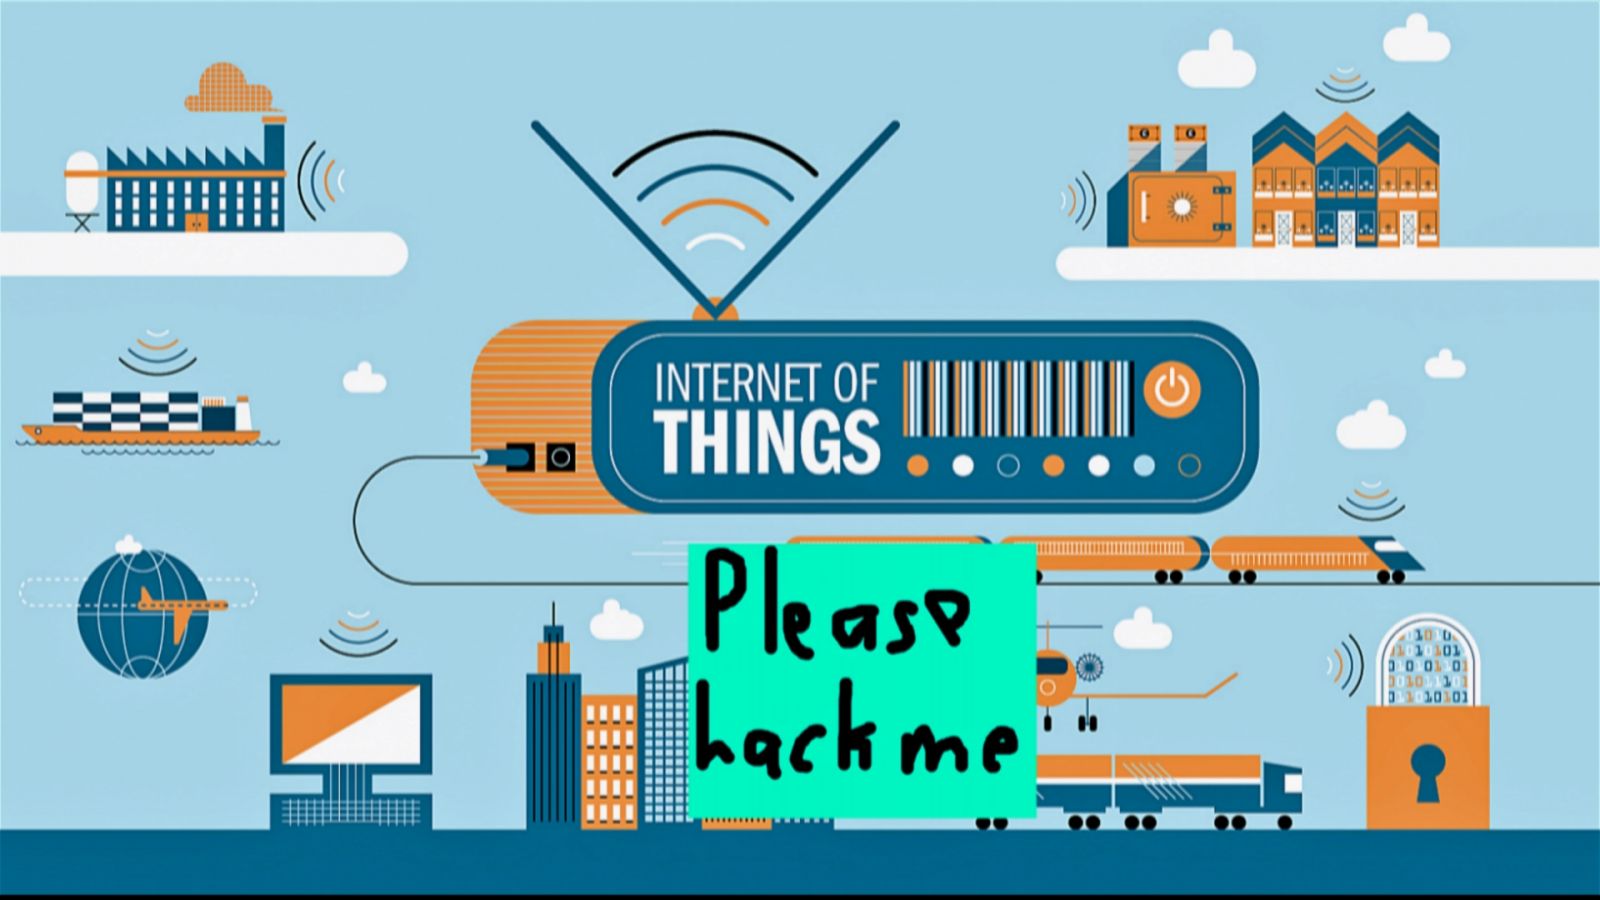 Bad omen for the IoT future